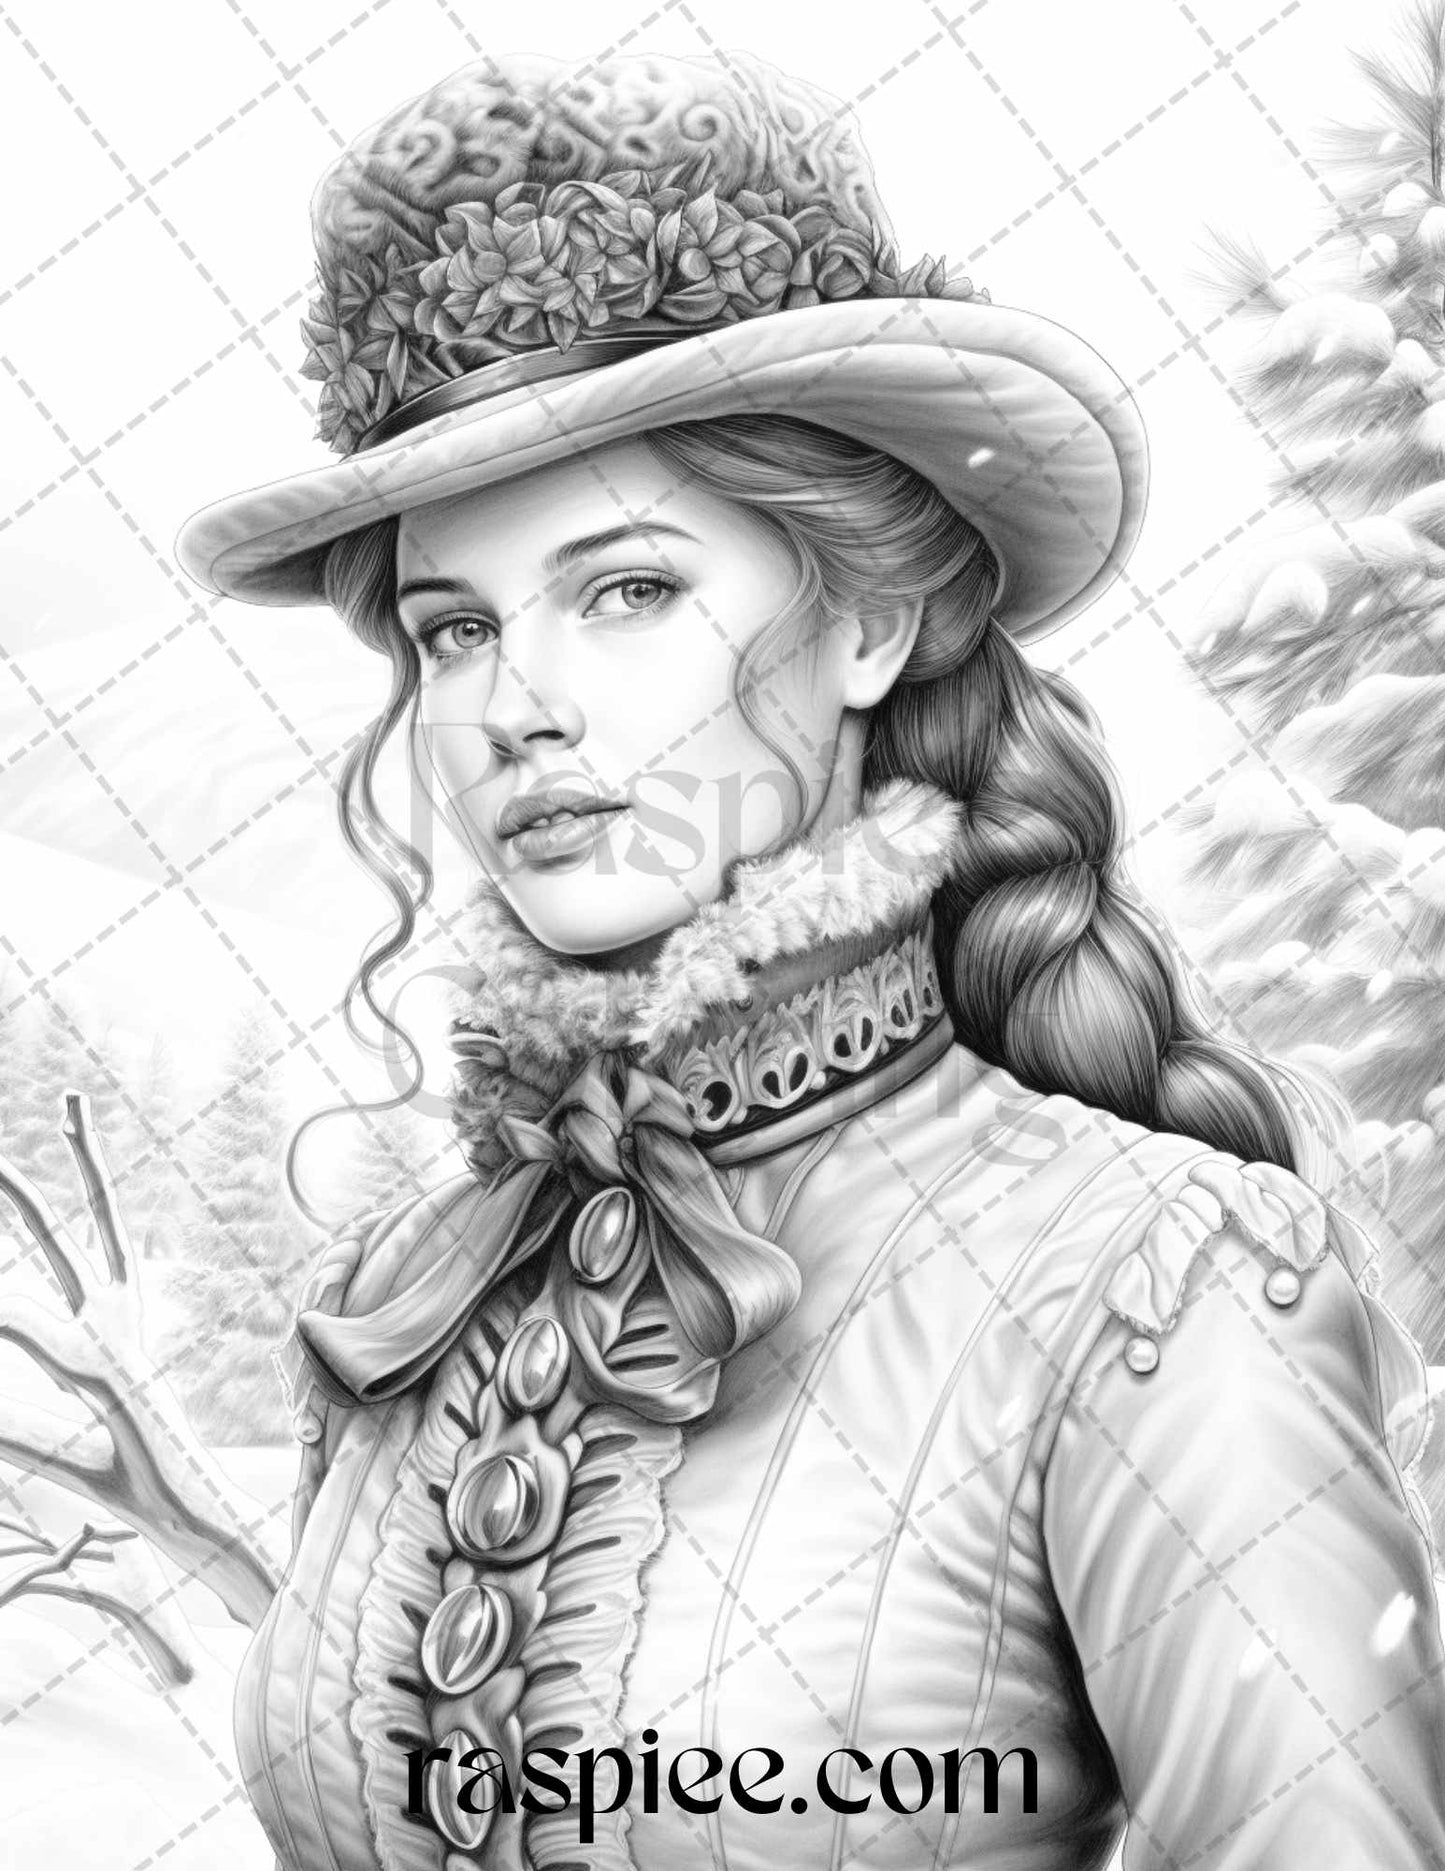 Victorian Winter Coloring Page, Grayscale Adult Coloring Printable, Detailed Vintage Portrait, Instant Download Art, Stress-Relief Coloring Sheet, DIY Craft Supply Illustration, Relaxing Coloring Activity, Vintage Style Coloring Book, Winter Scene Coloring, Portrait Coloring Pages, Christmas Coloring Pages